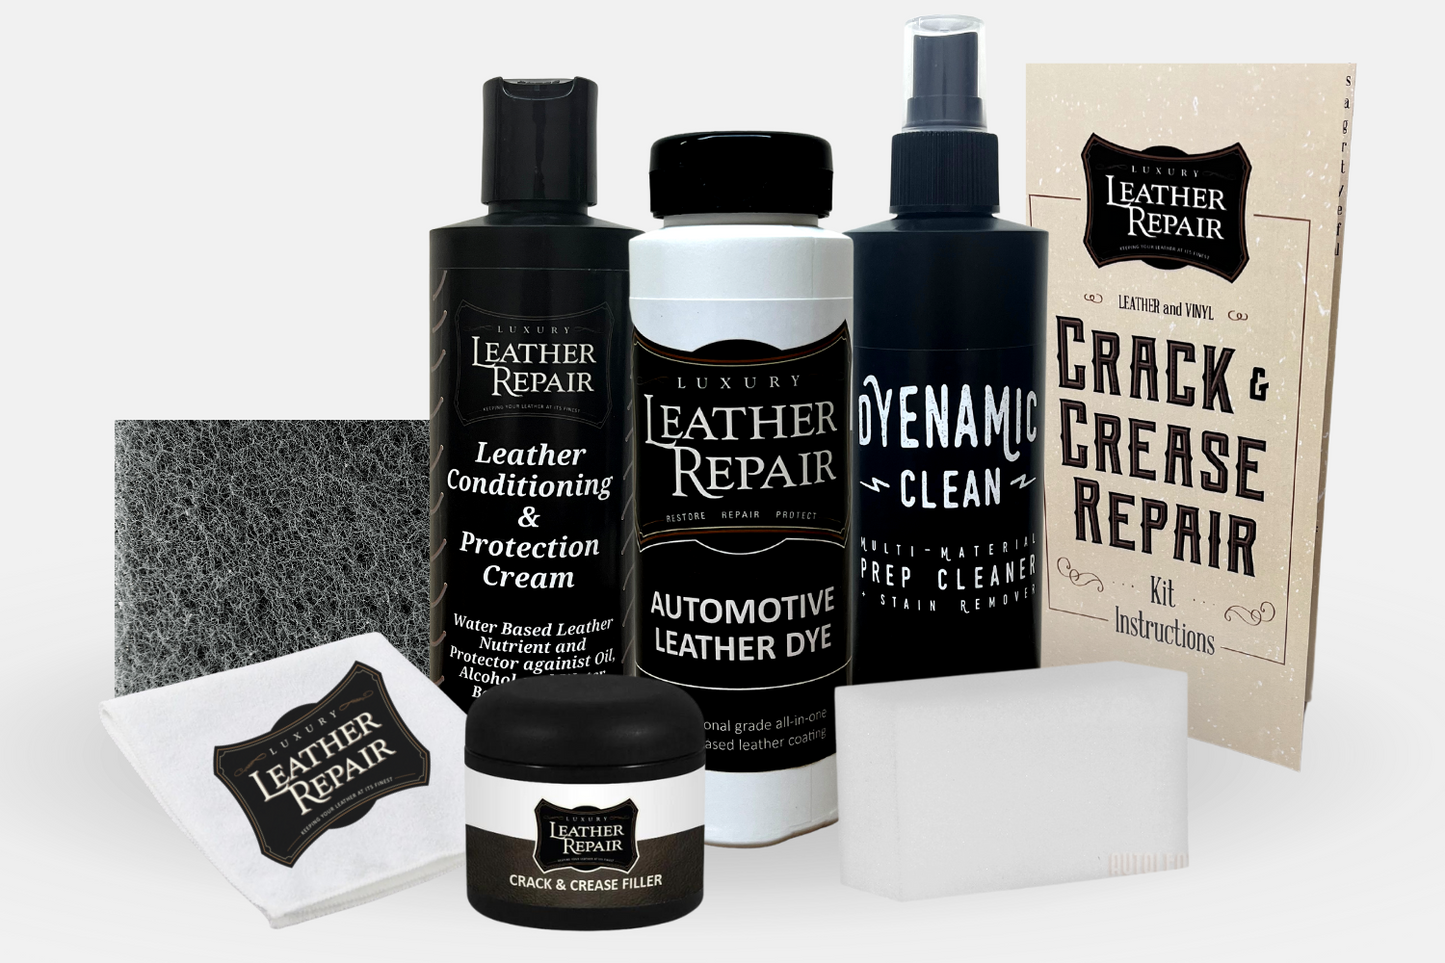 Best Black Leather Repair Kits - Top 7 Black Leather Repair Kits To Restore  Your Items 